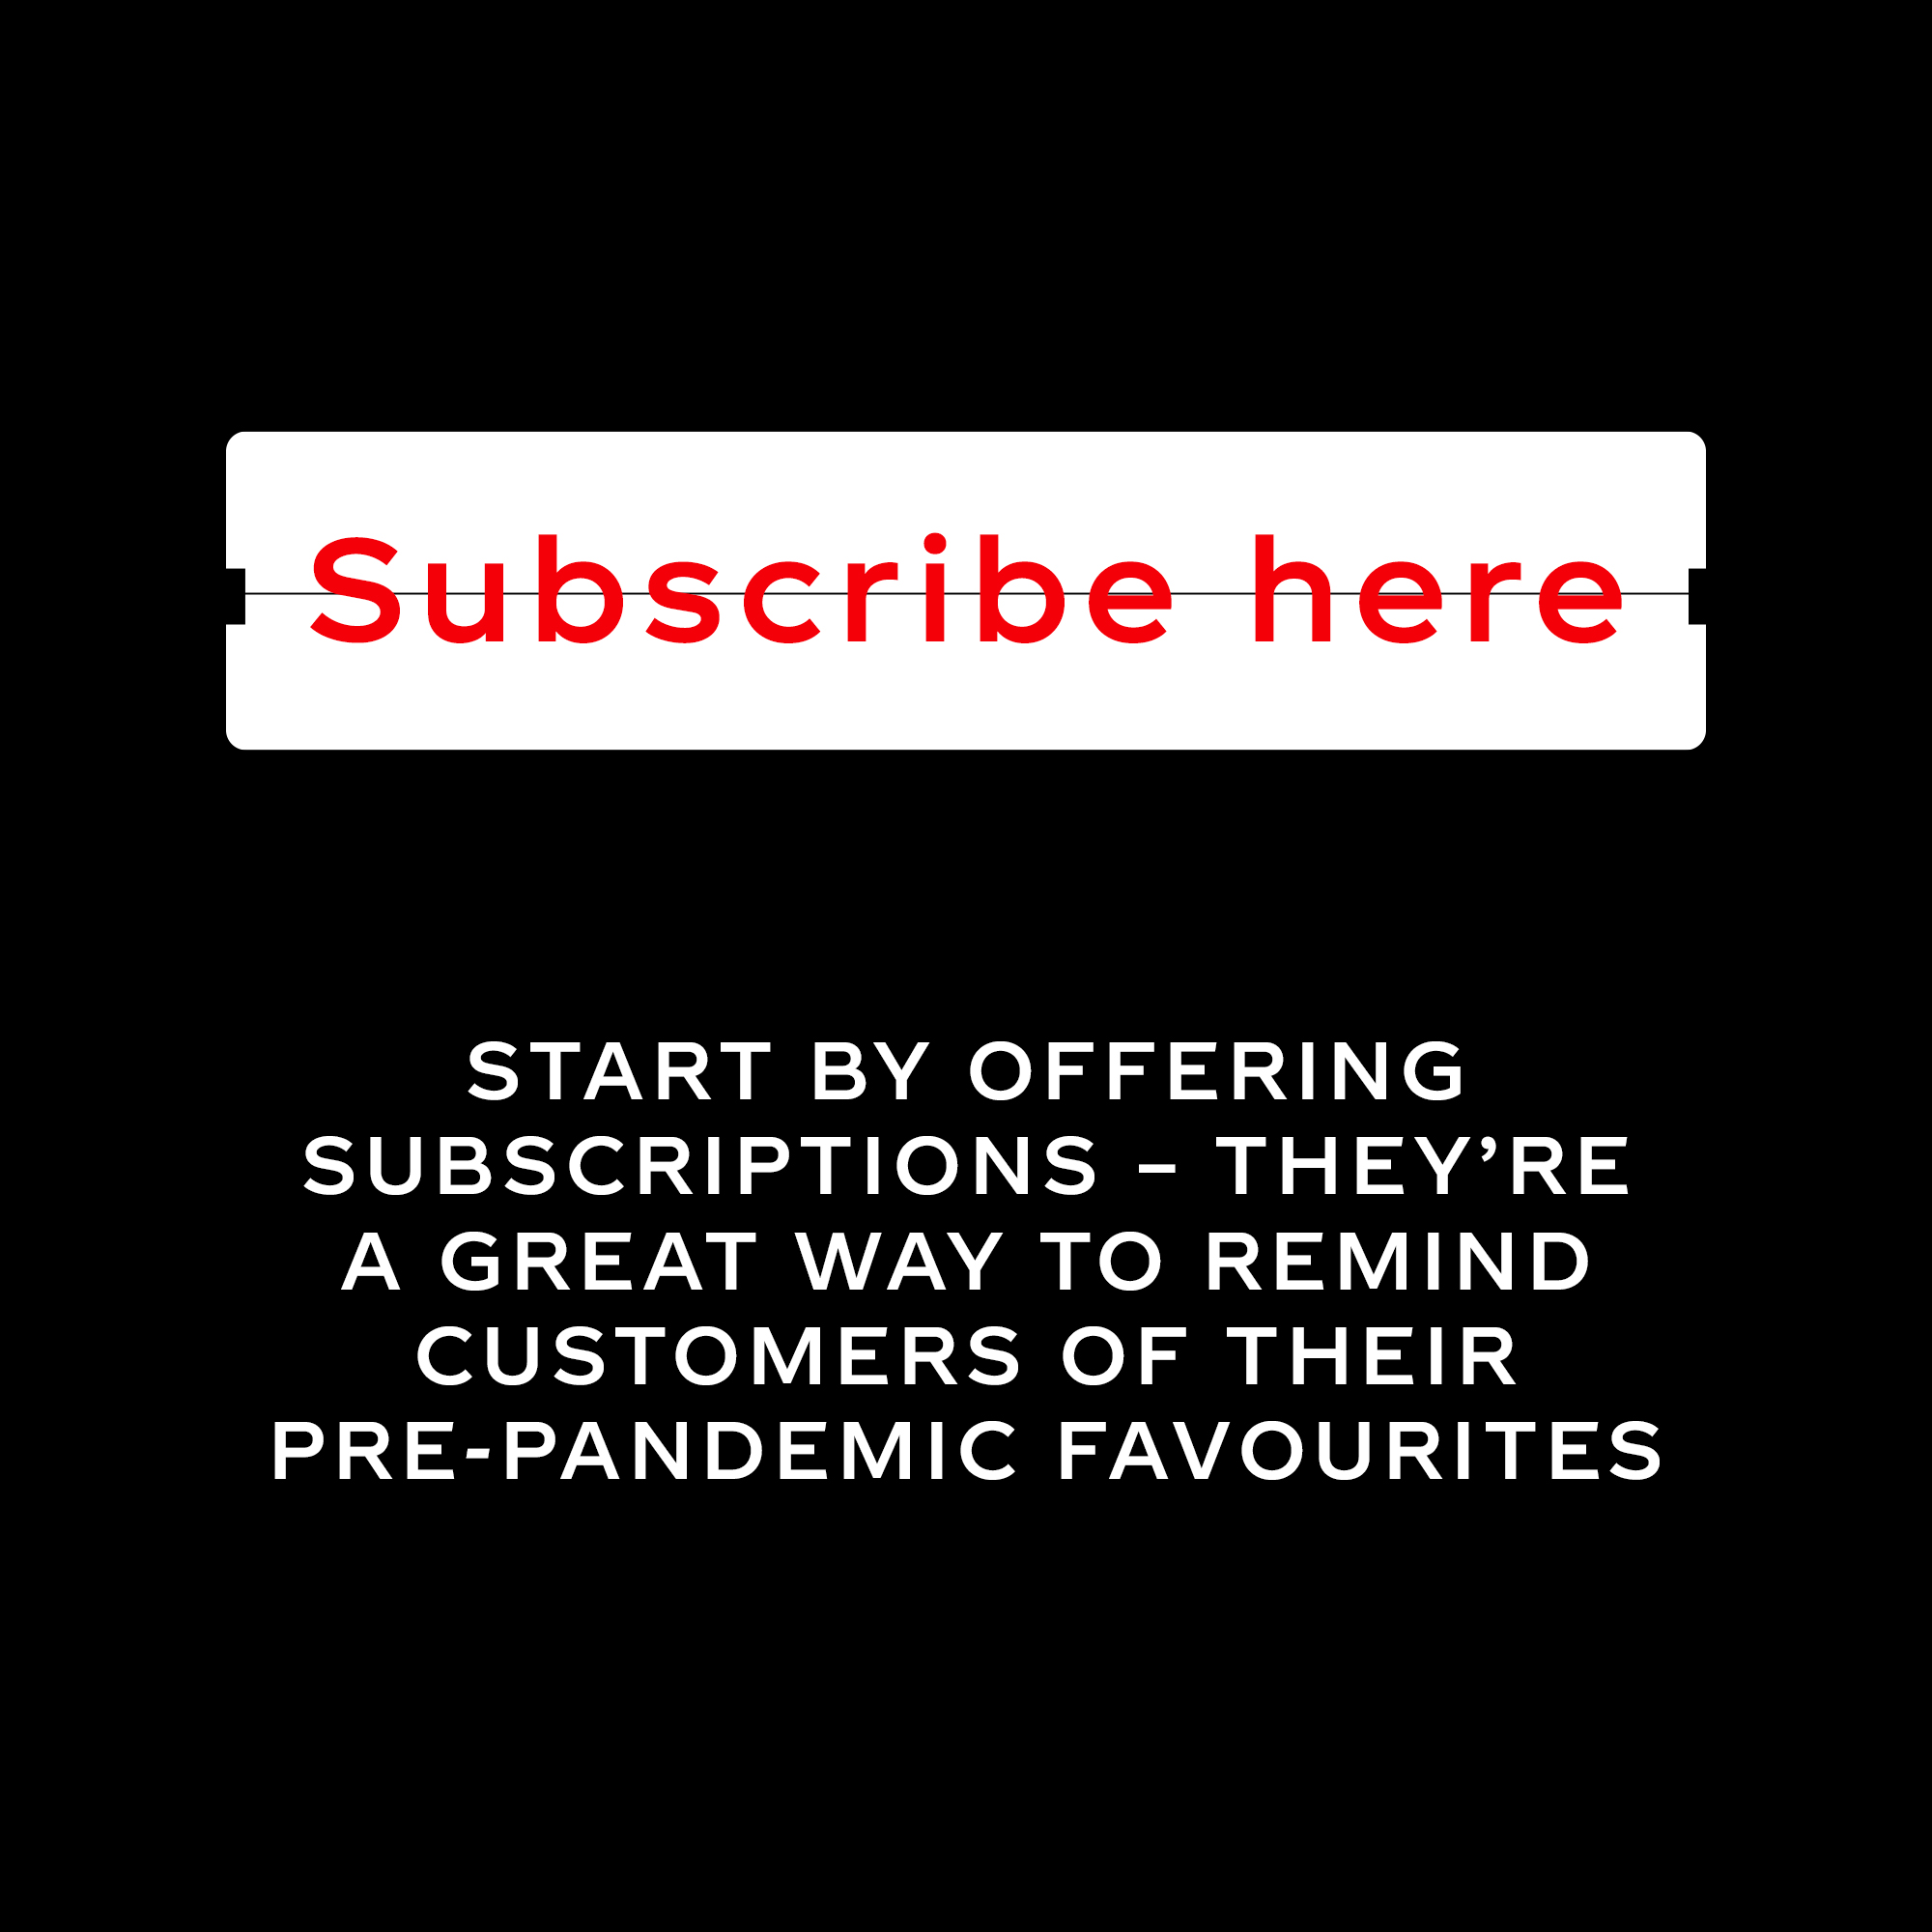 Button-like text with 'Subscribe here' text, and white text that says 'Start by offering subscriptions - they're a great way to remind customers of their pre-pandemic favourites